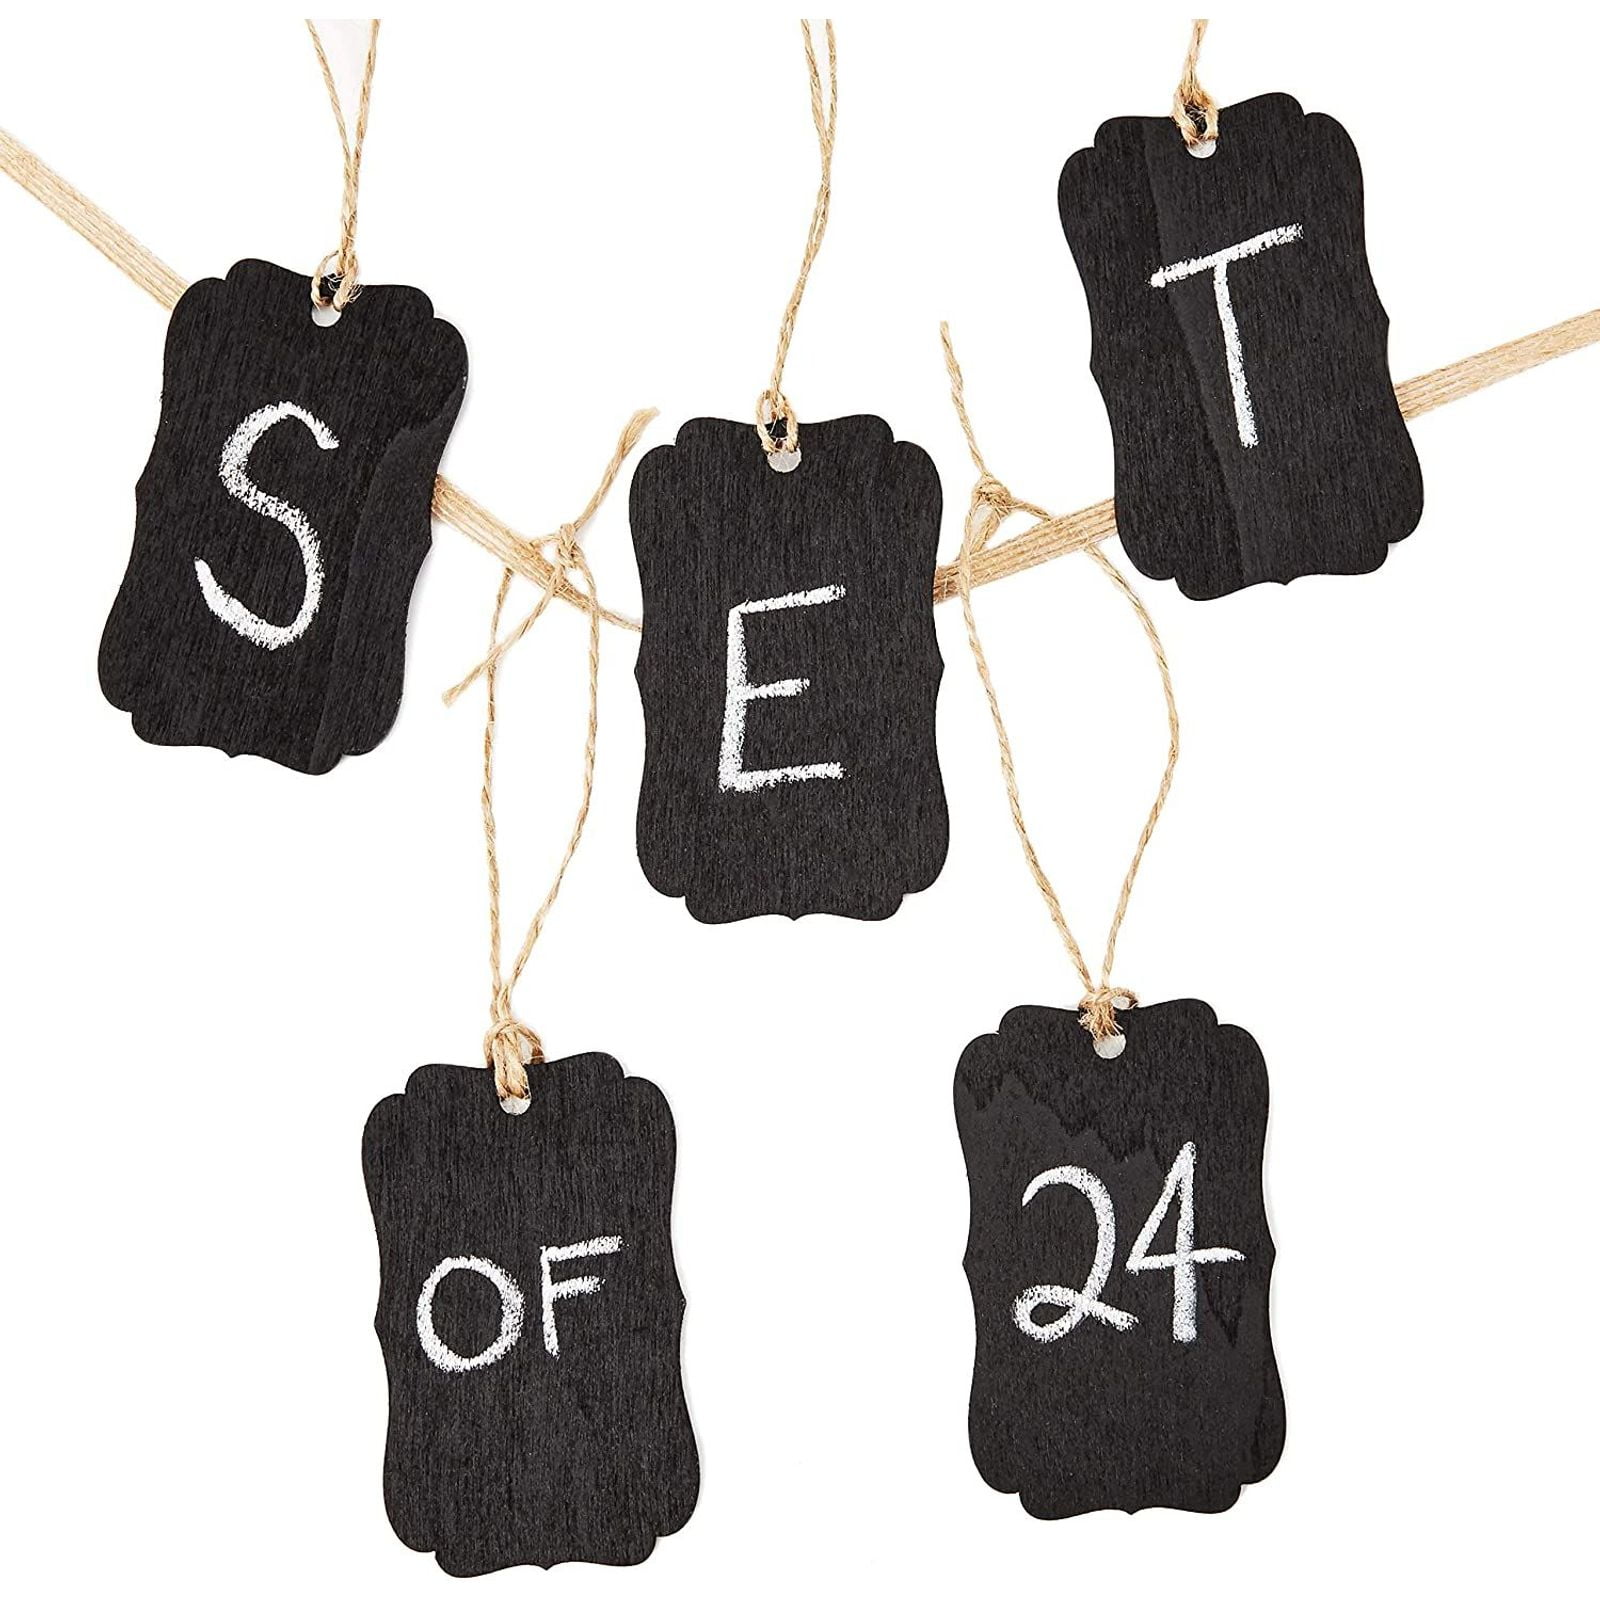 Details about   24pcs Mini Wooden Chalkboard Tag Labels w/String for DIY Crafts Gifts 6 Designs